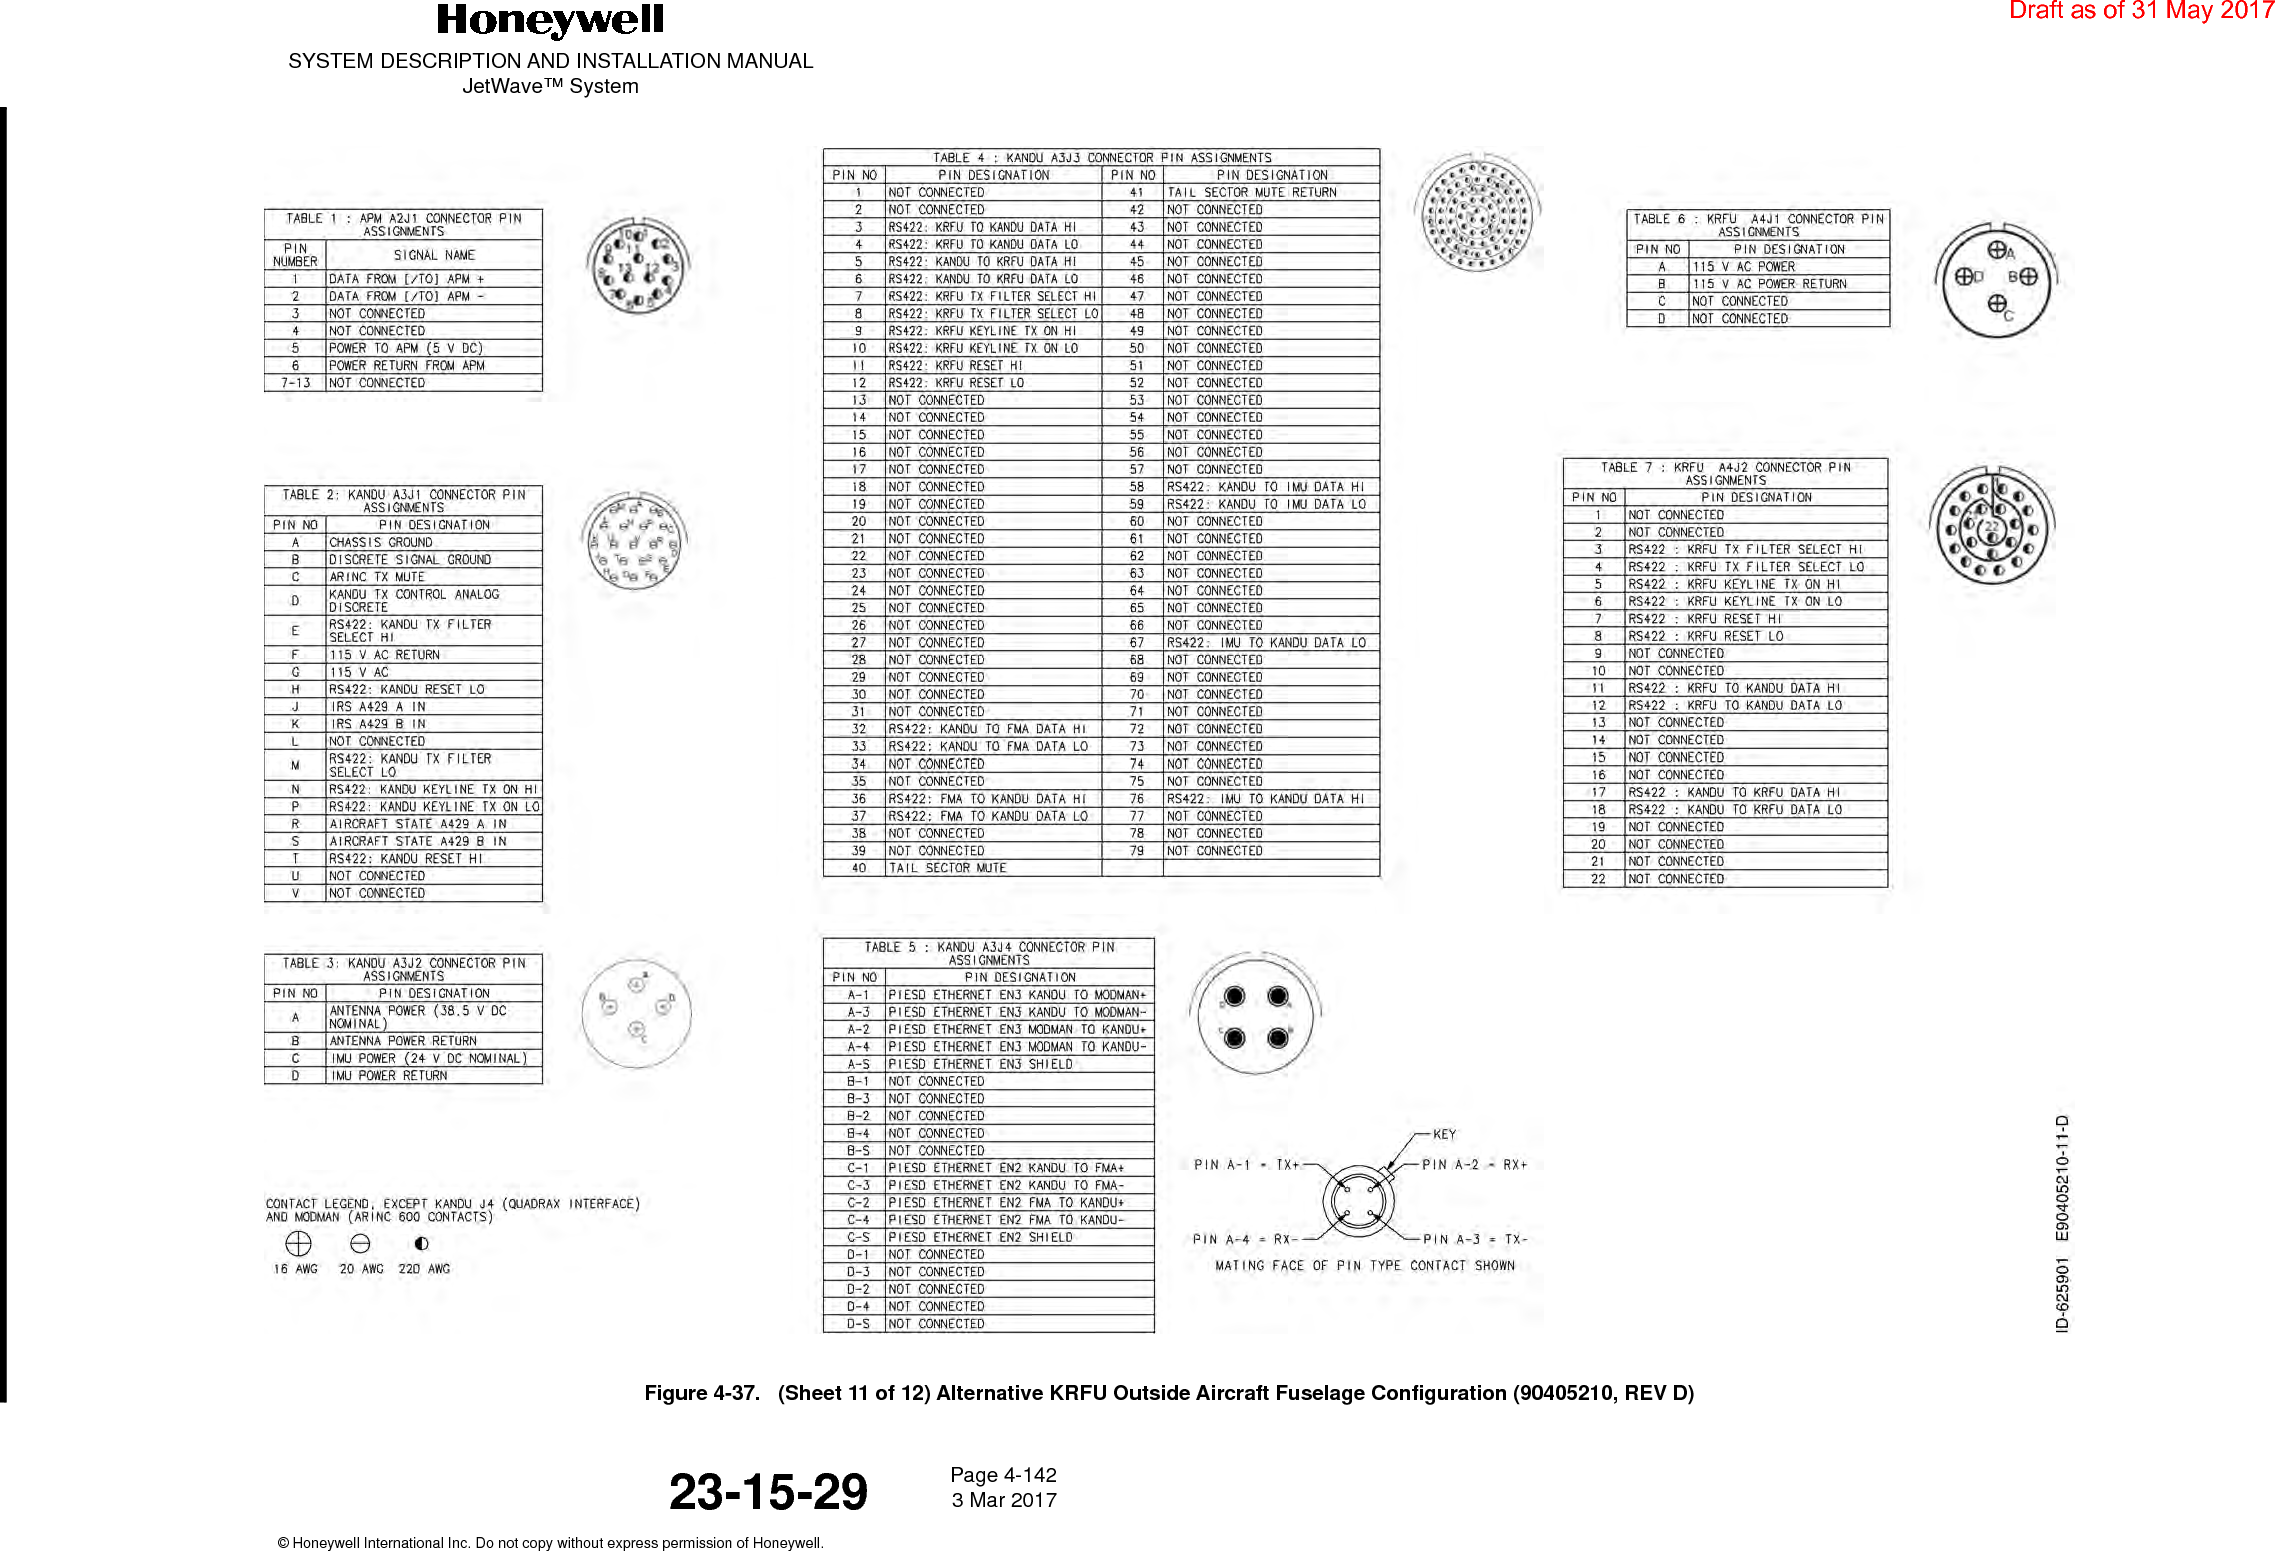 SYSTEM DESCRIPTION AND INSTALLATION MANUALJetWave™ SystemPage 4-142 3 Mar 2017© Honeywell International Inc. Do not copy without express permission of Honeywell.23-15-29Figure 4-37.   (Sheet 11 of 12) Alternative KRFU Outside Aircraft Fuselage Configuration (90405210, REV D)Draft as of 31 May 2017